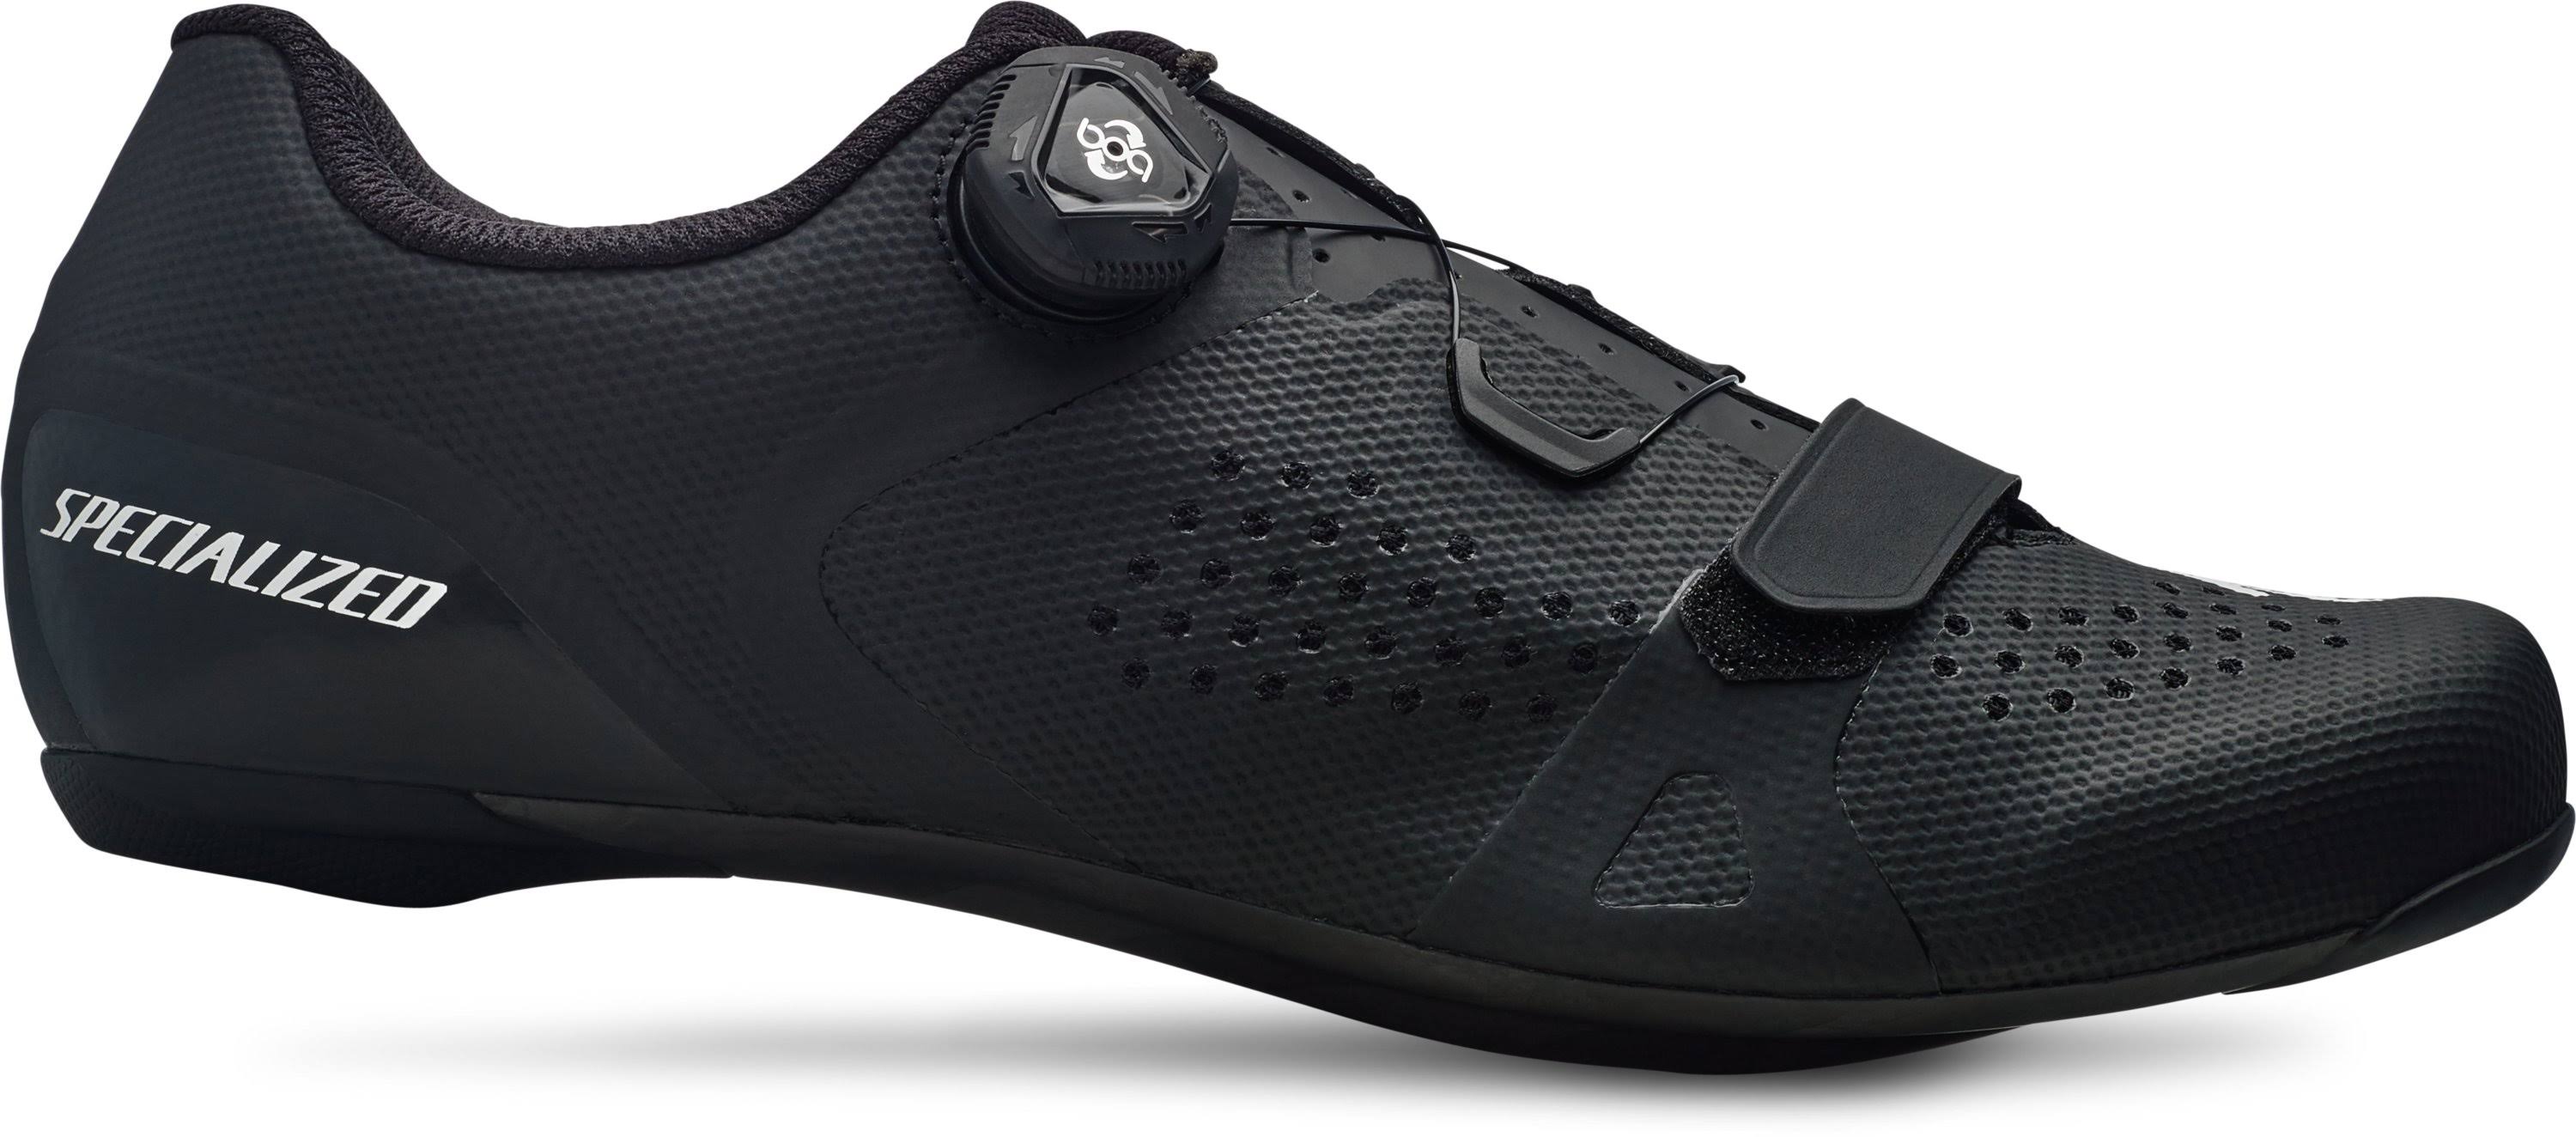 Specialized Torch 2.0 Road Shoes - Black - 43